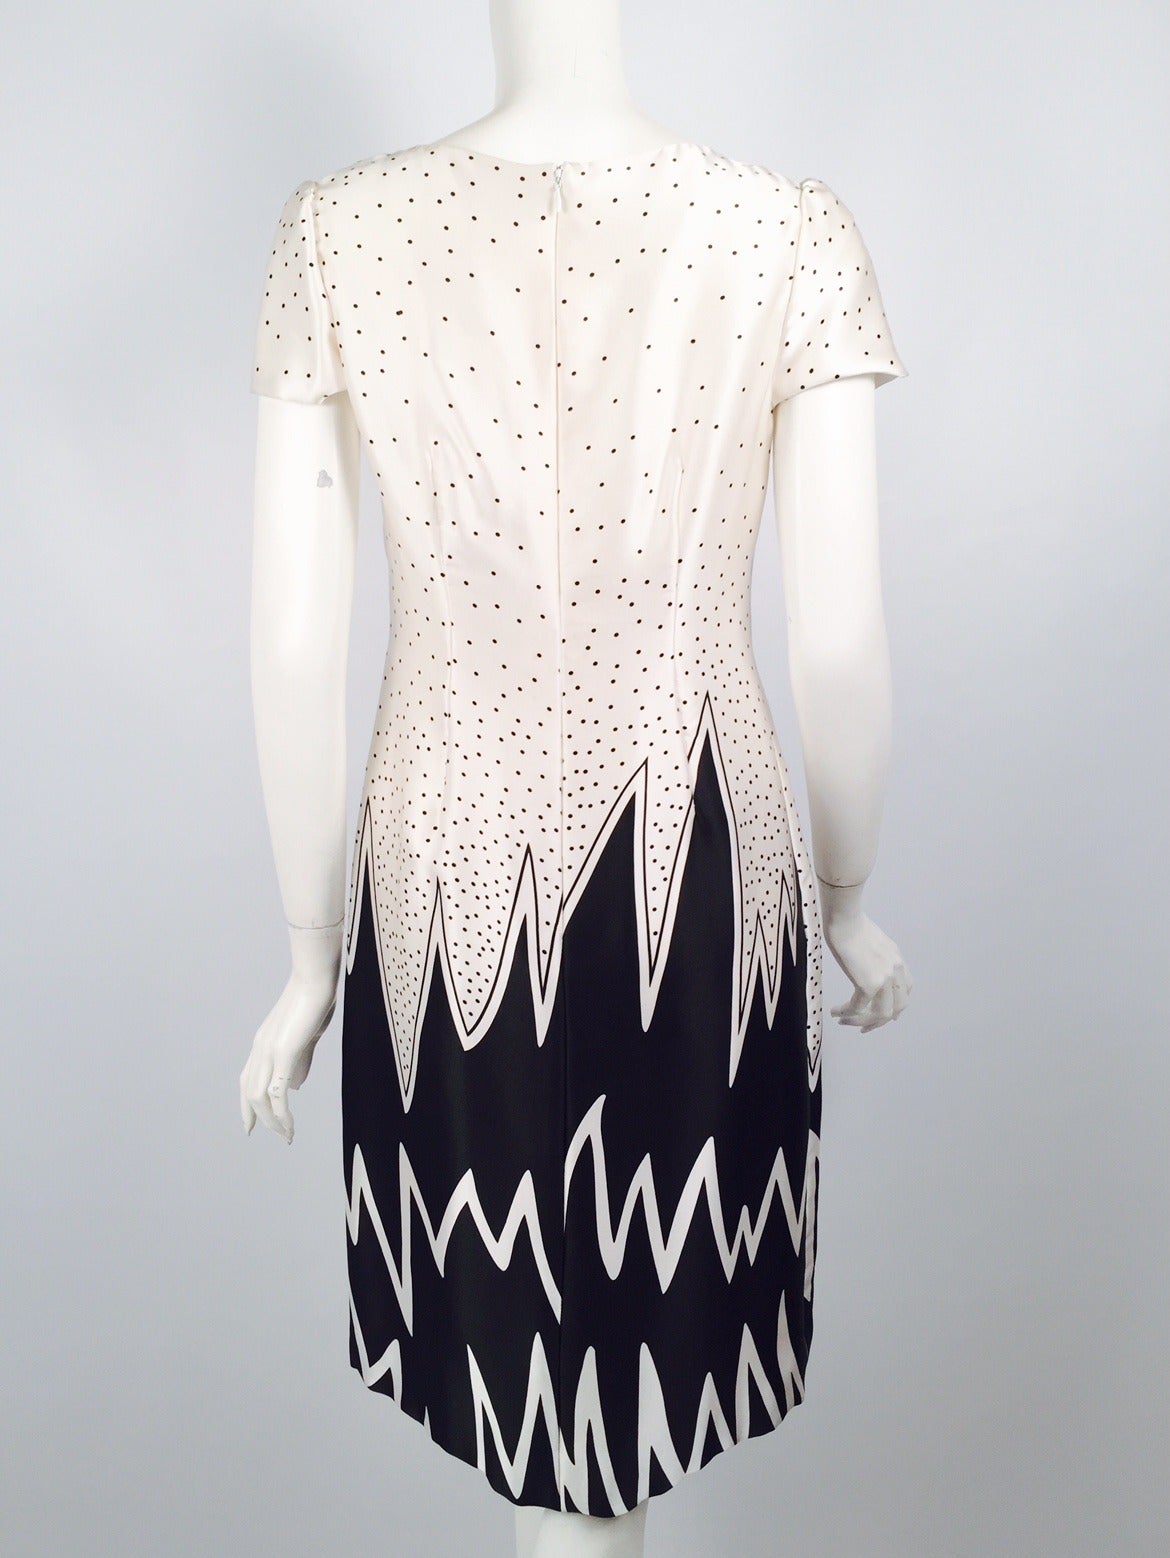 100% Silk Fiandaca Black and White Polka Dots and Flames Dress In Excellent Condition For Sale In Palm Beach, FL